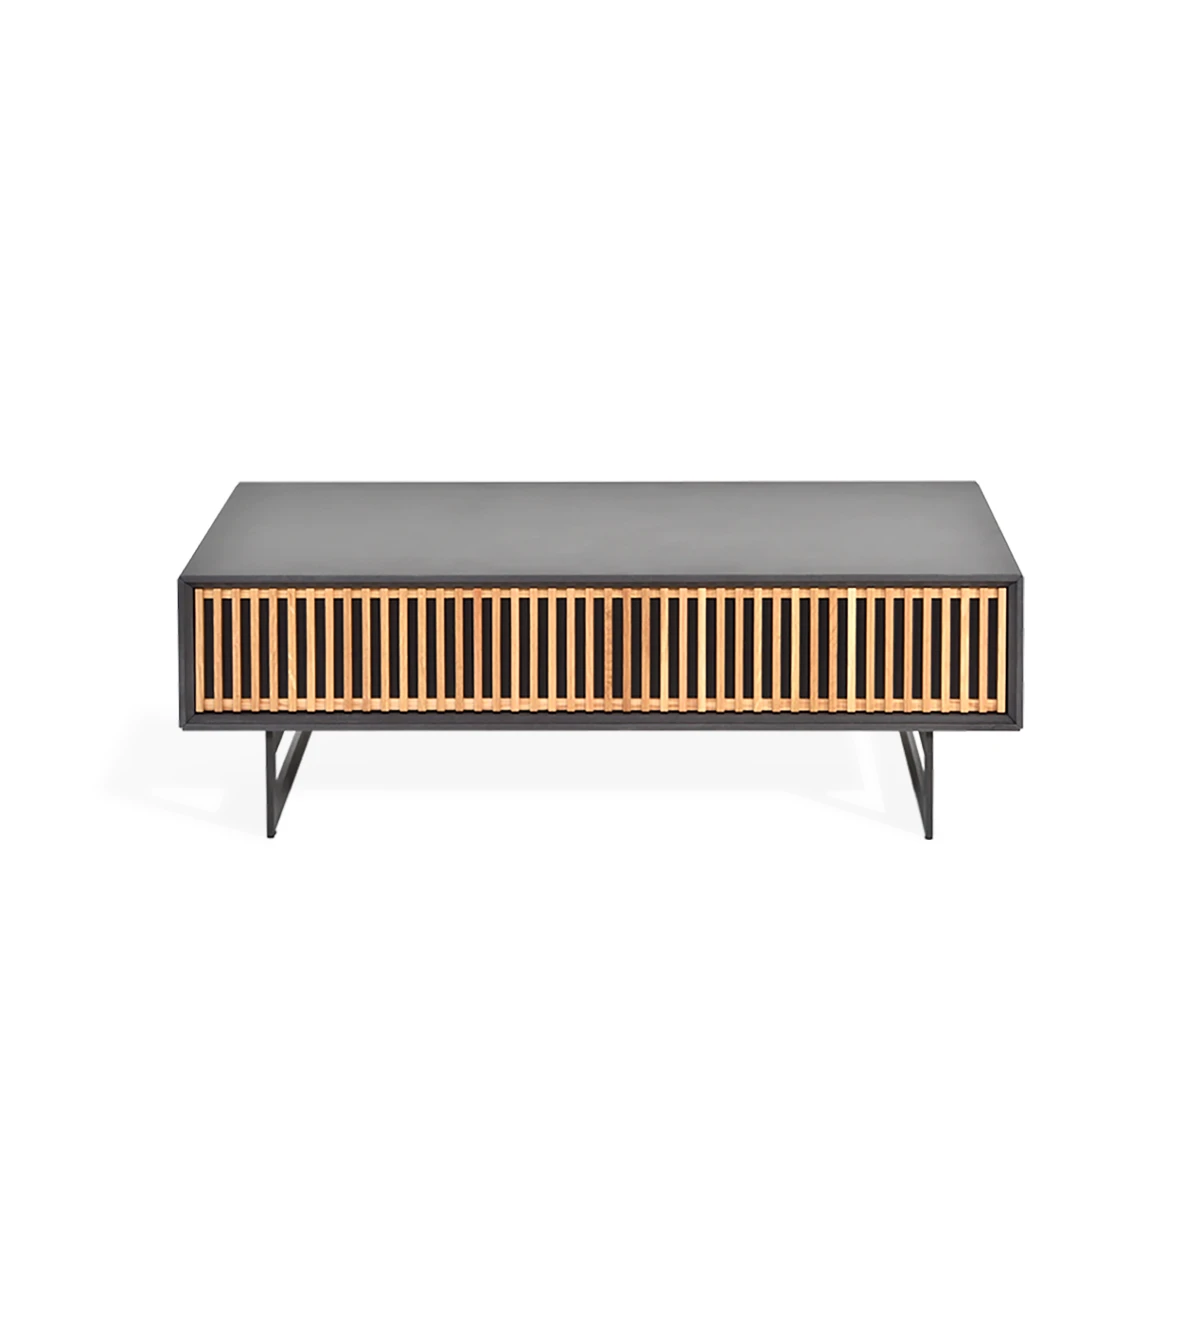 Tokyo rectangular center table, 1 drawer in natural oak, pearl lacquered structure and black lacquered metal feet, 110 x 65 cm.